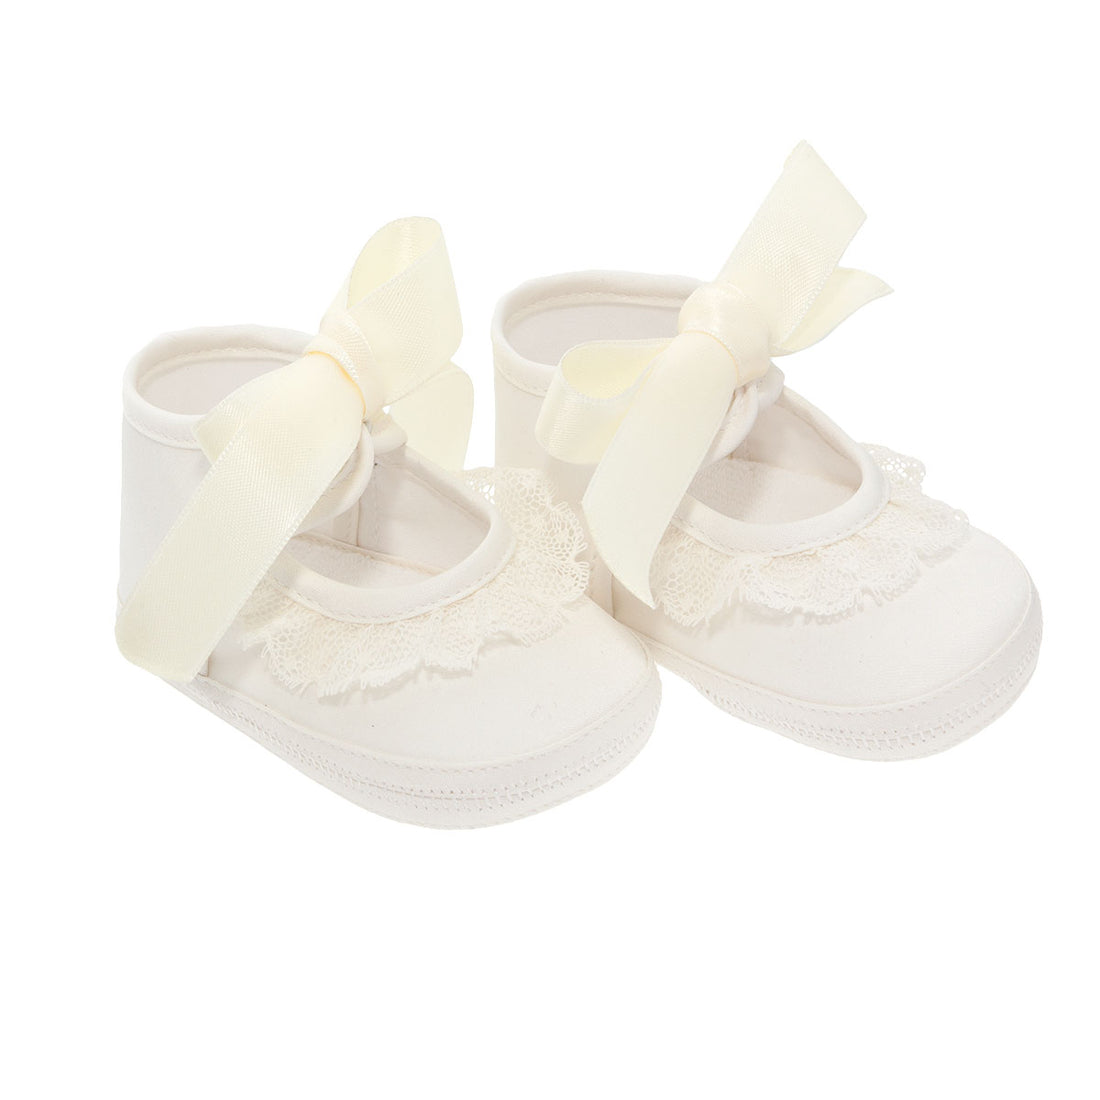 r&j-cambrass-sa-summer-baby-shoes-320-beige- (1)